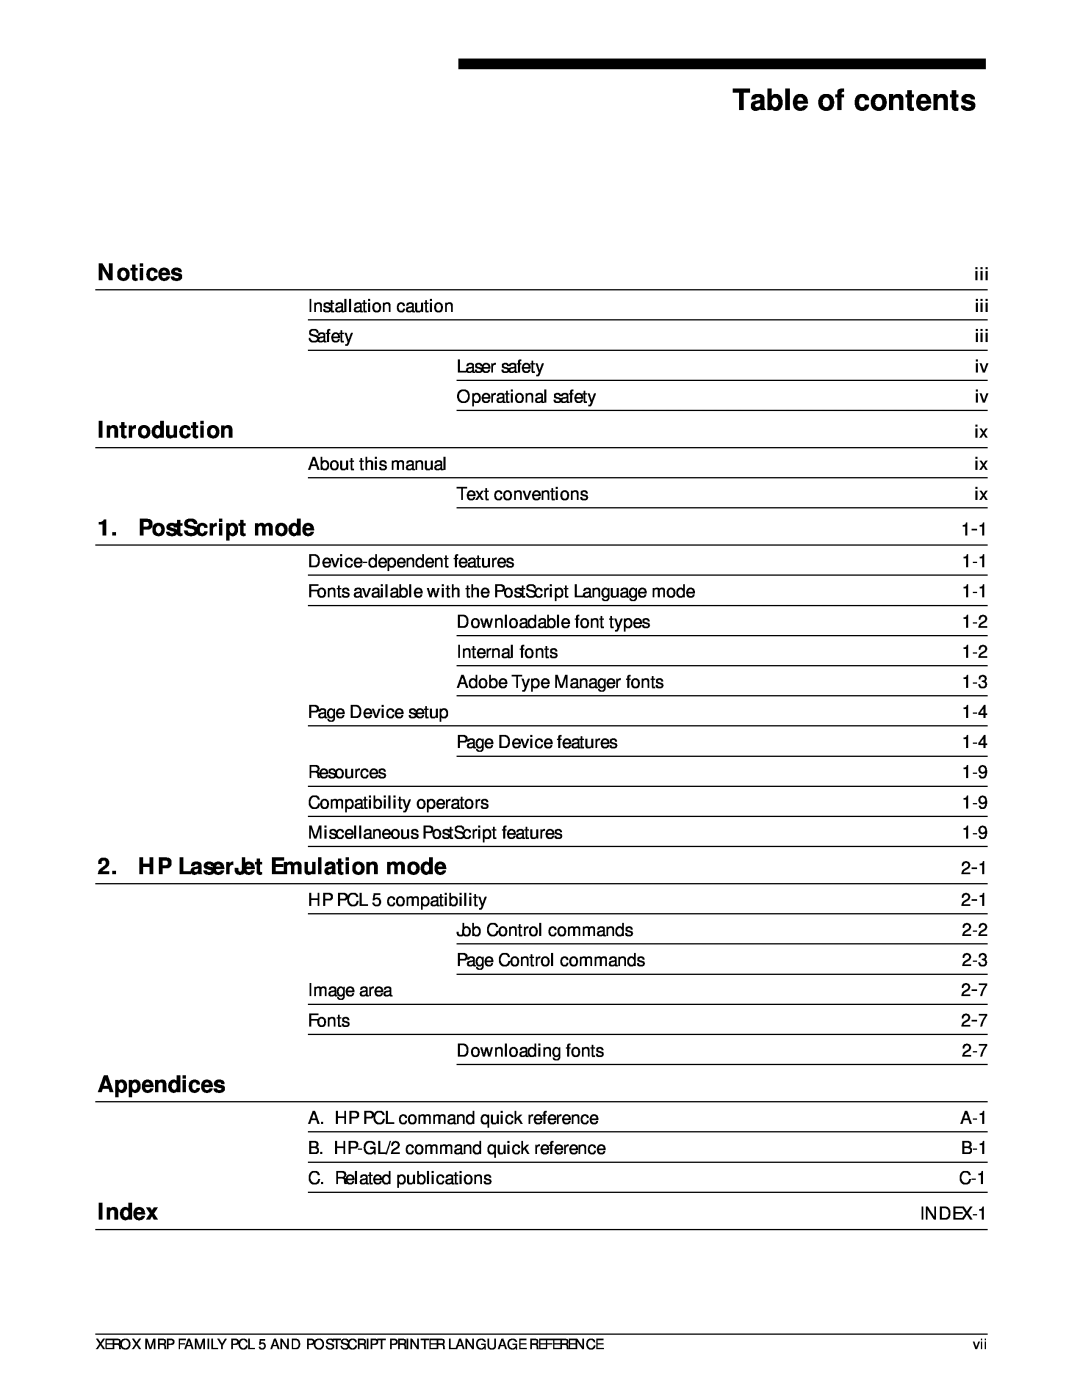 Xerox 4215/MRP Table of contents, Notices, Introduction, PostScript mode, HP LaserJet Emulation mode, Appendices, Index 